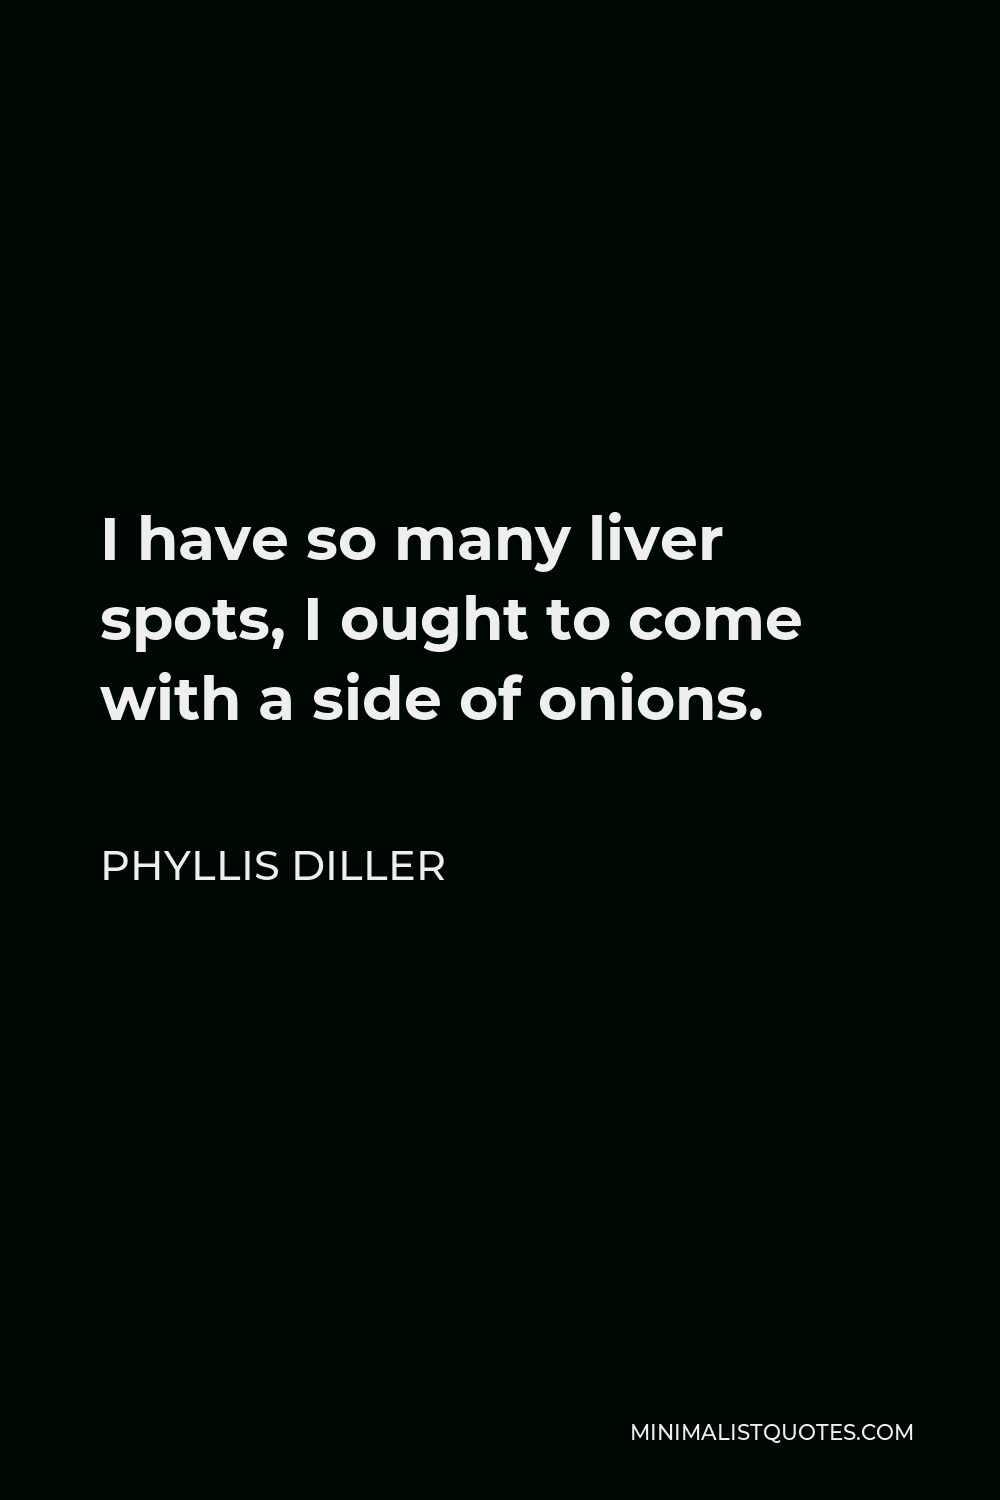 Phyllis Diller Quote - I have so many liver spots, I ought to come with a side of onions.